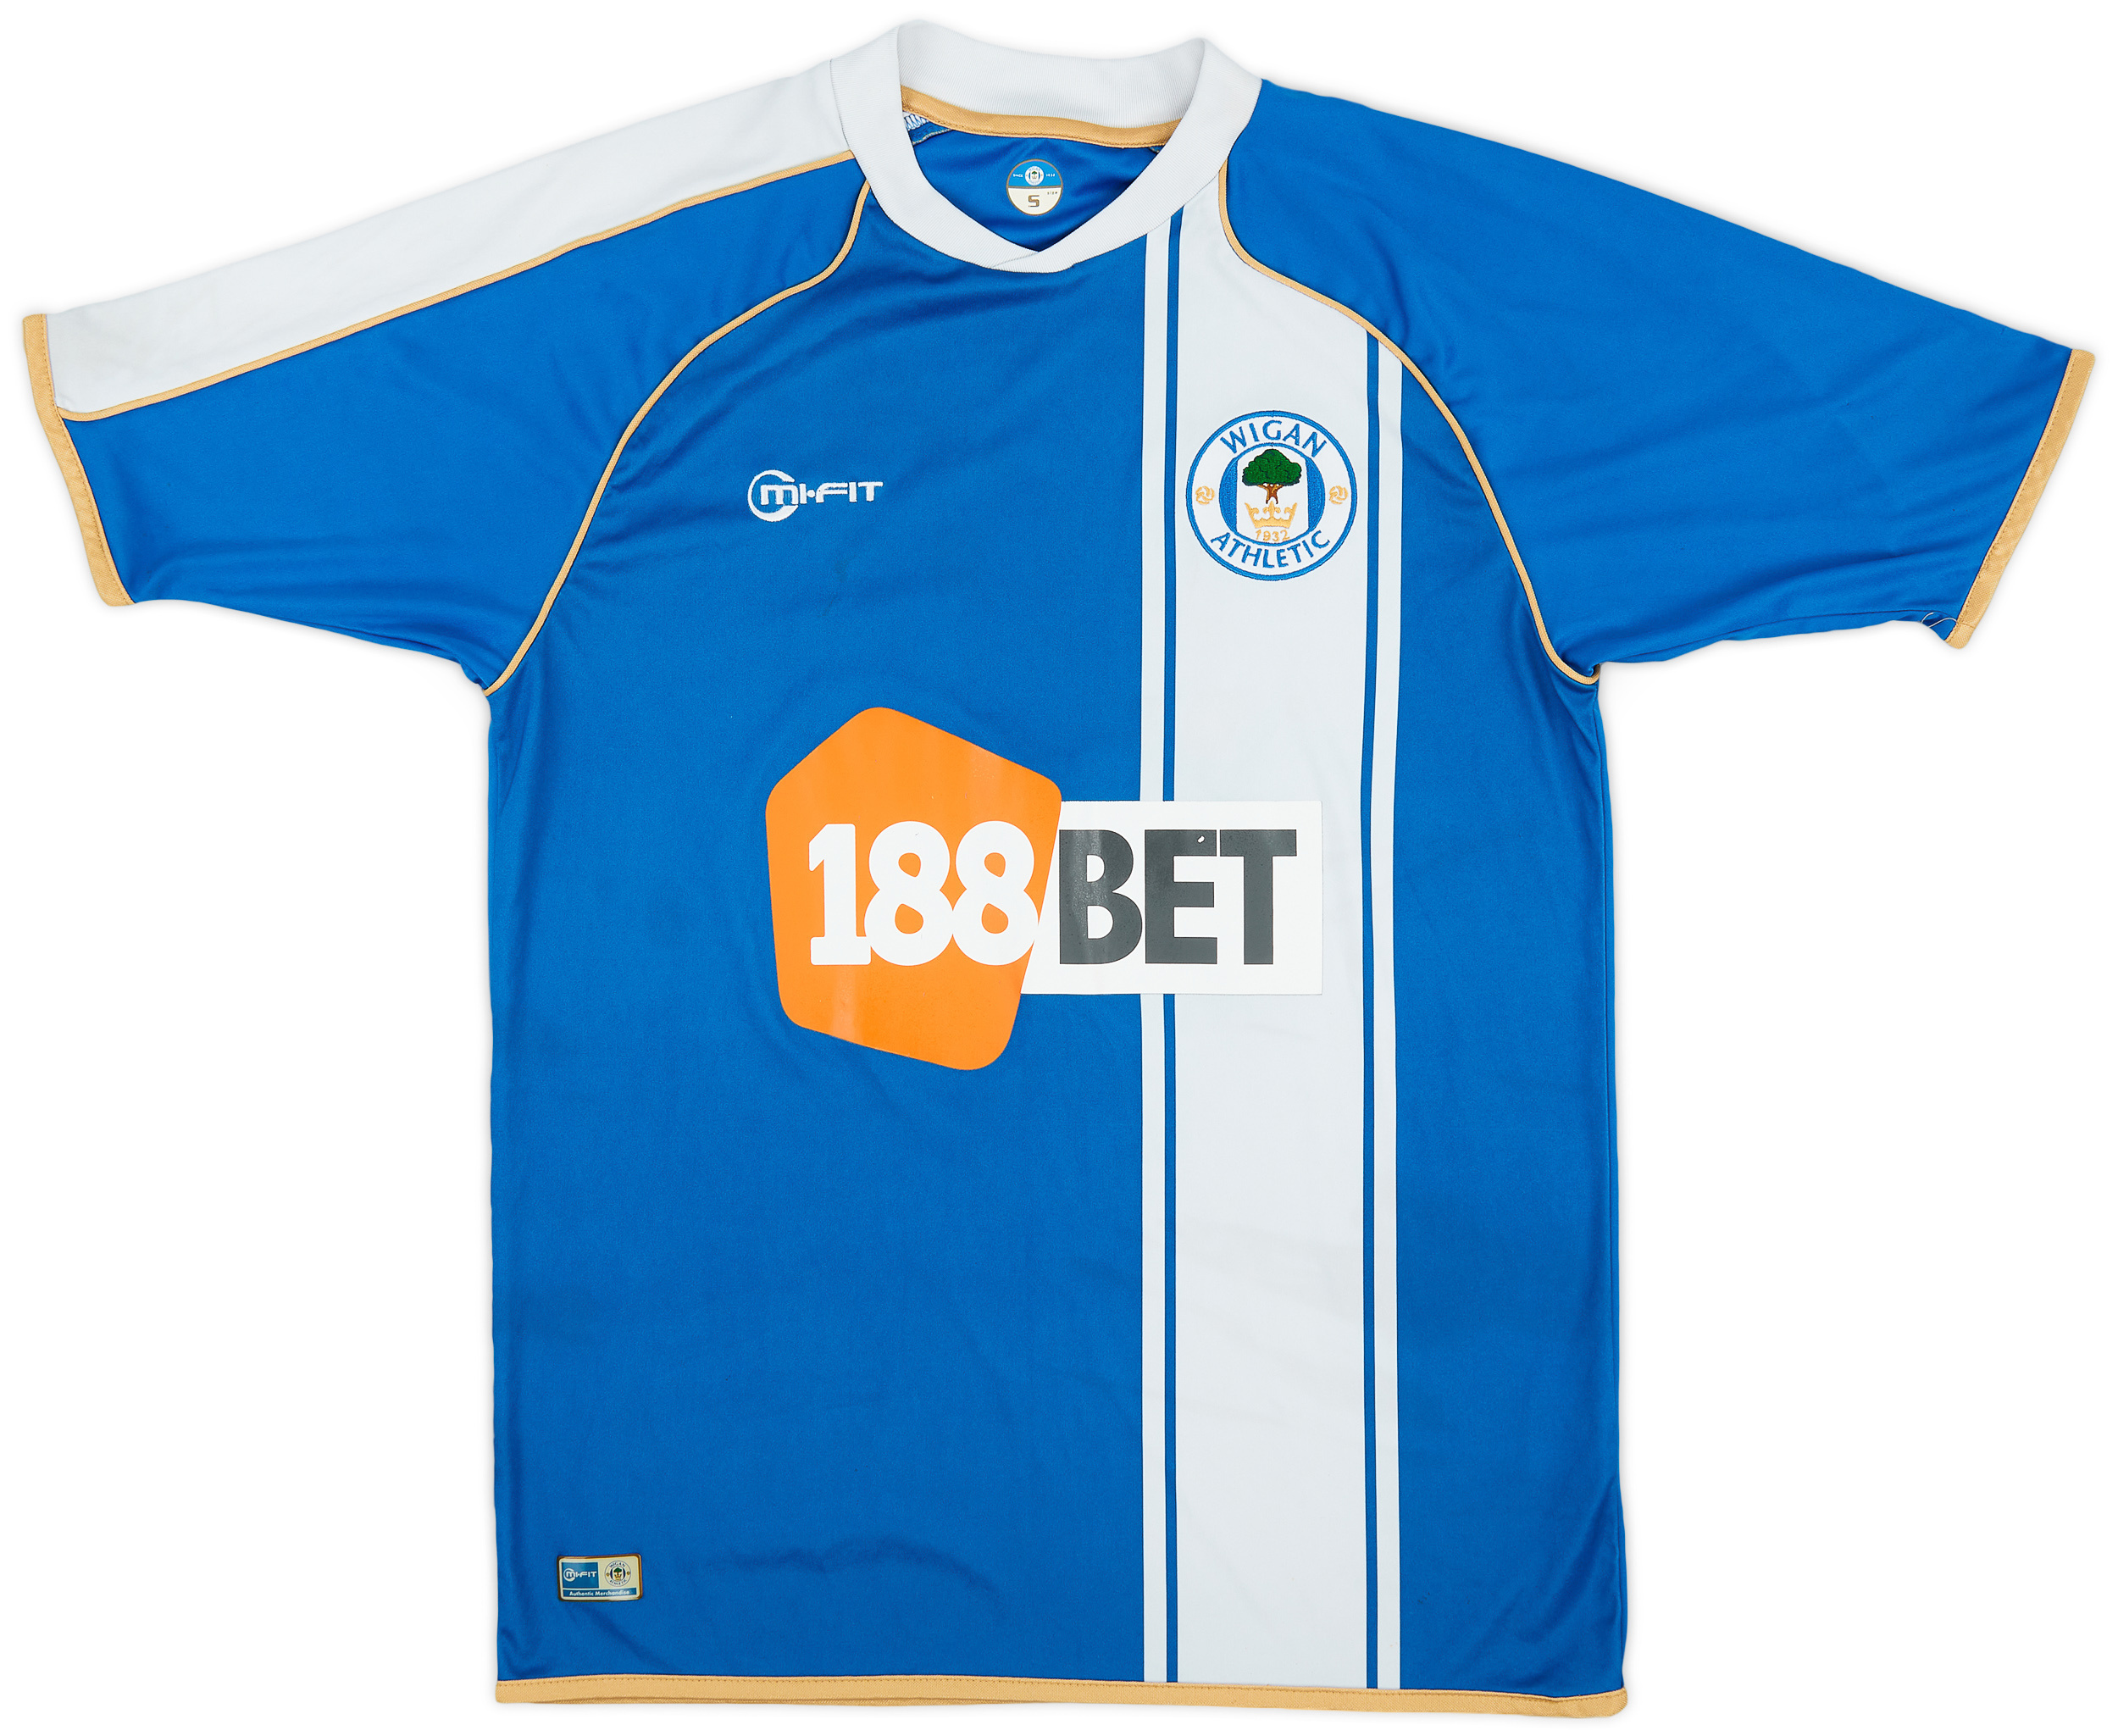 2010-11 Wigan Athletic Home Shirt - 5/10 - ()